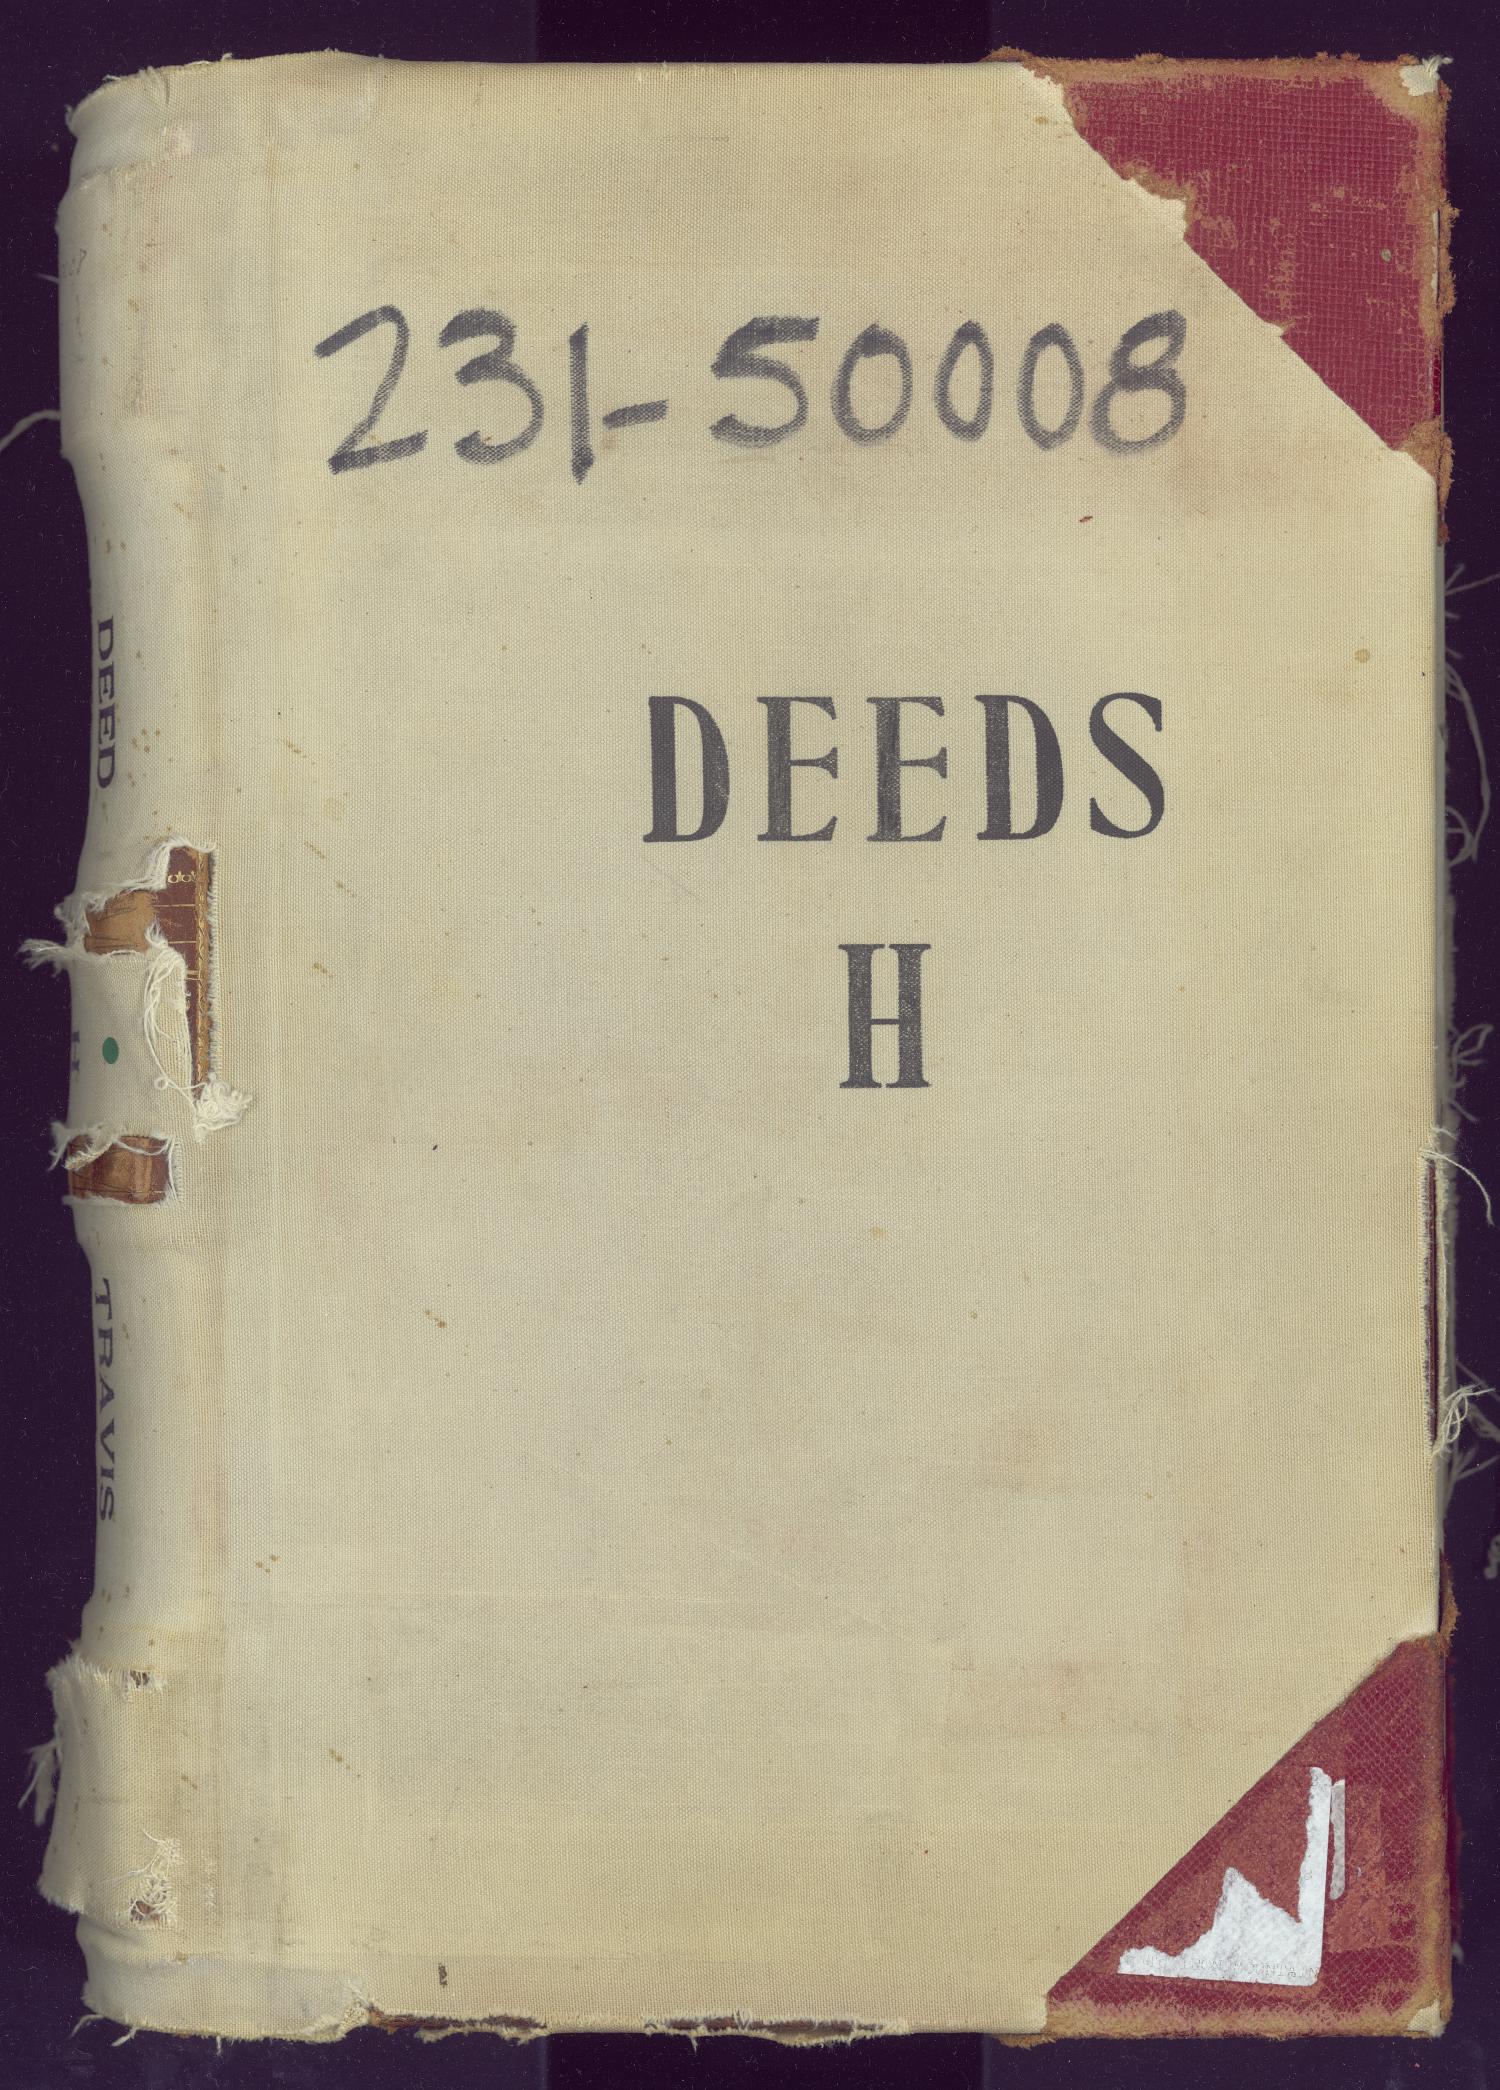 deed records